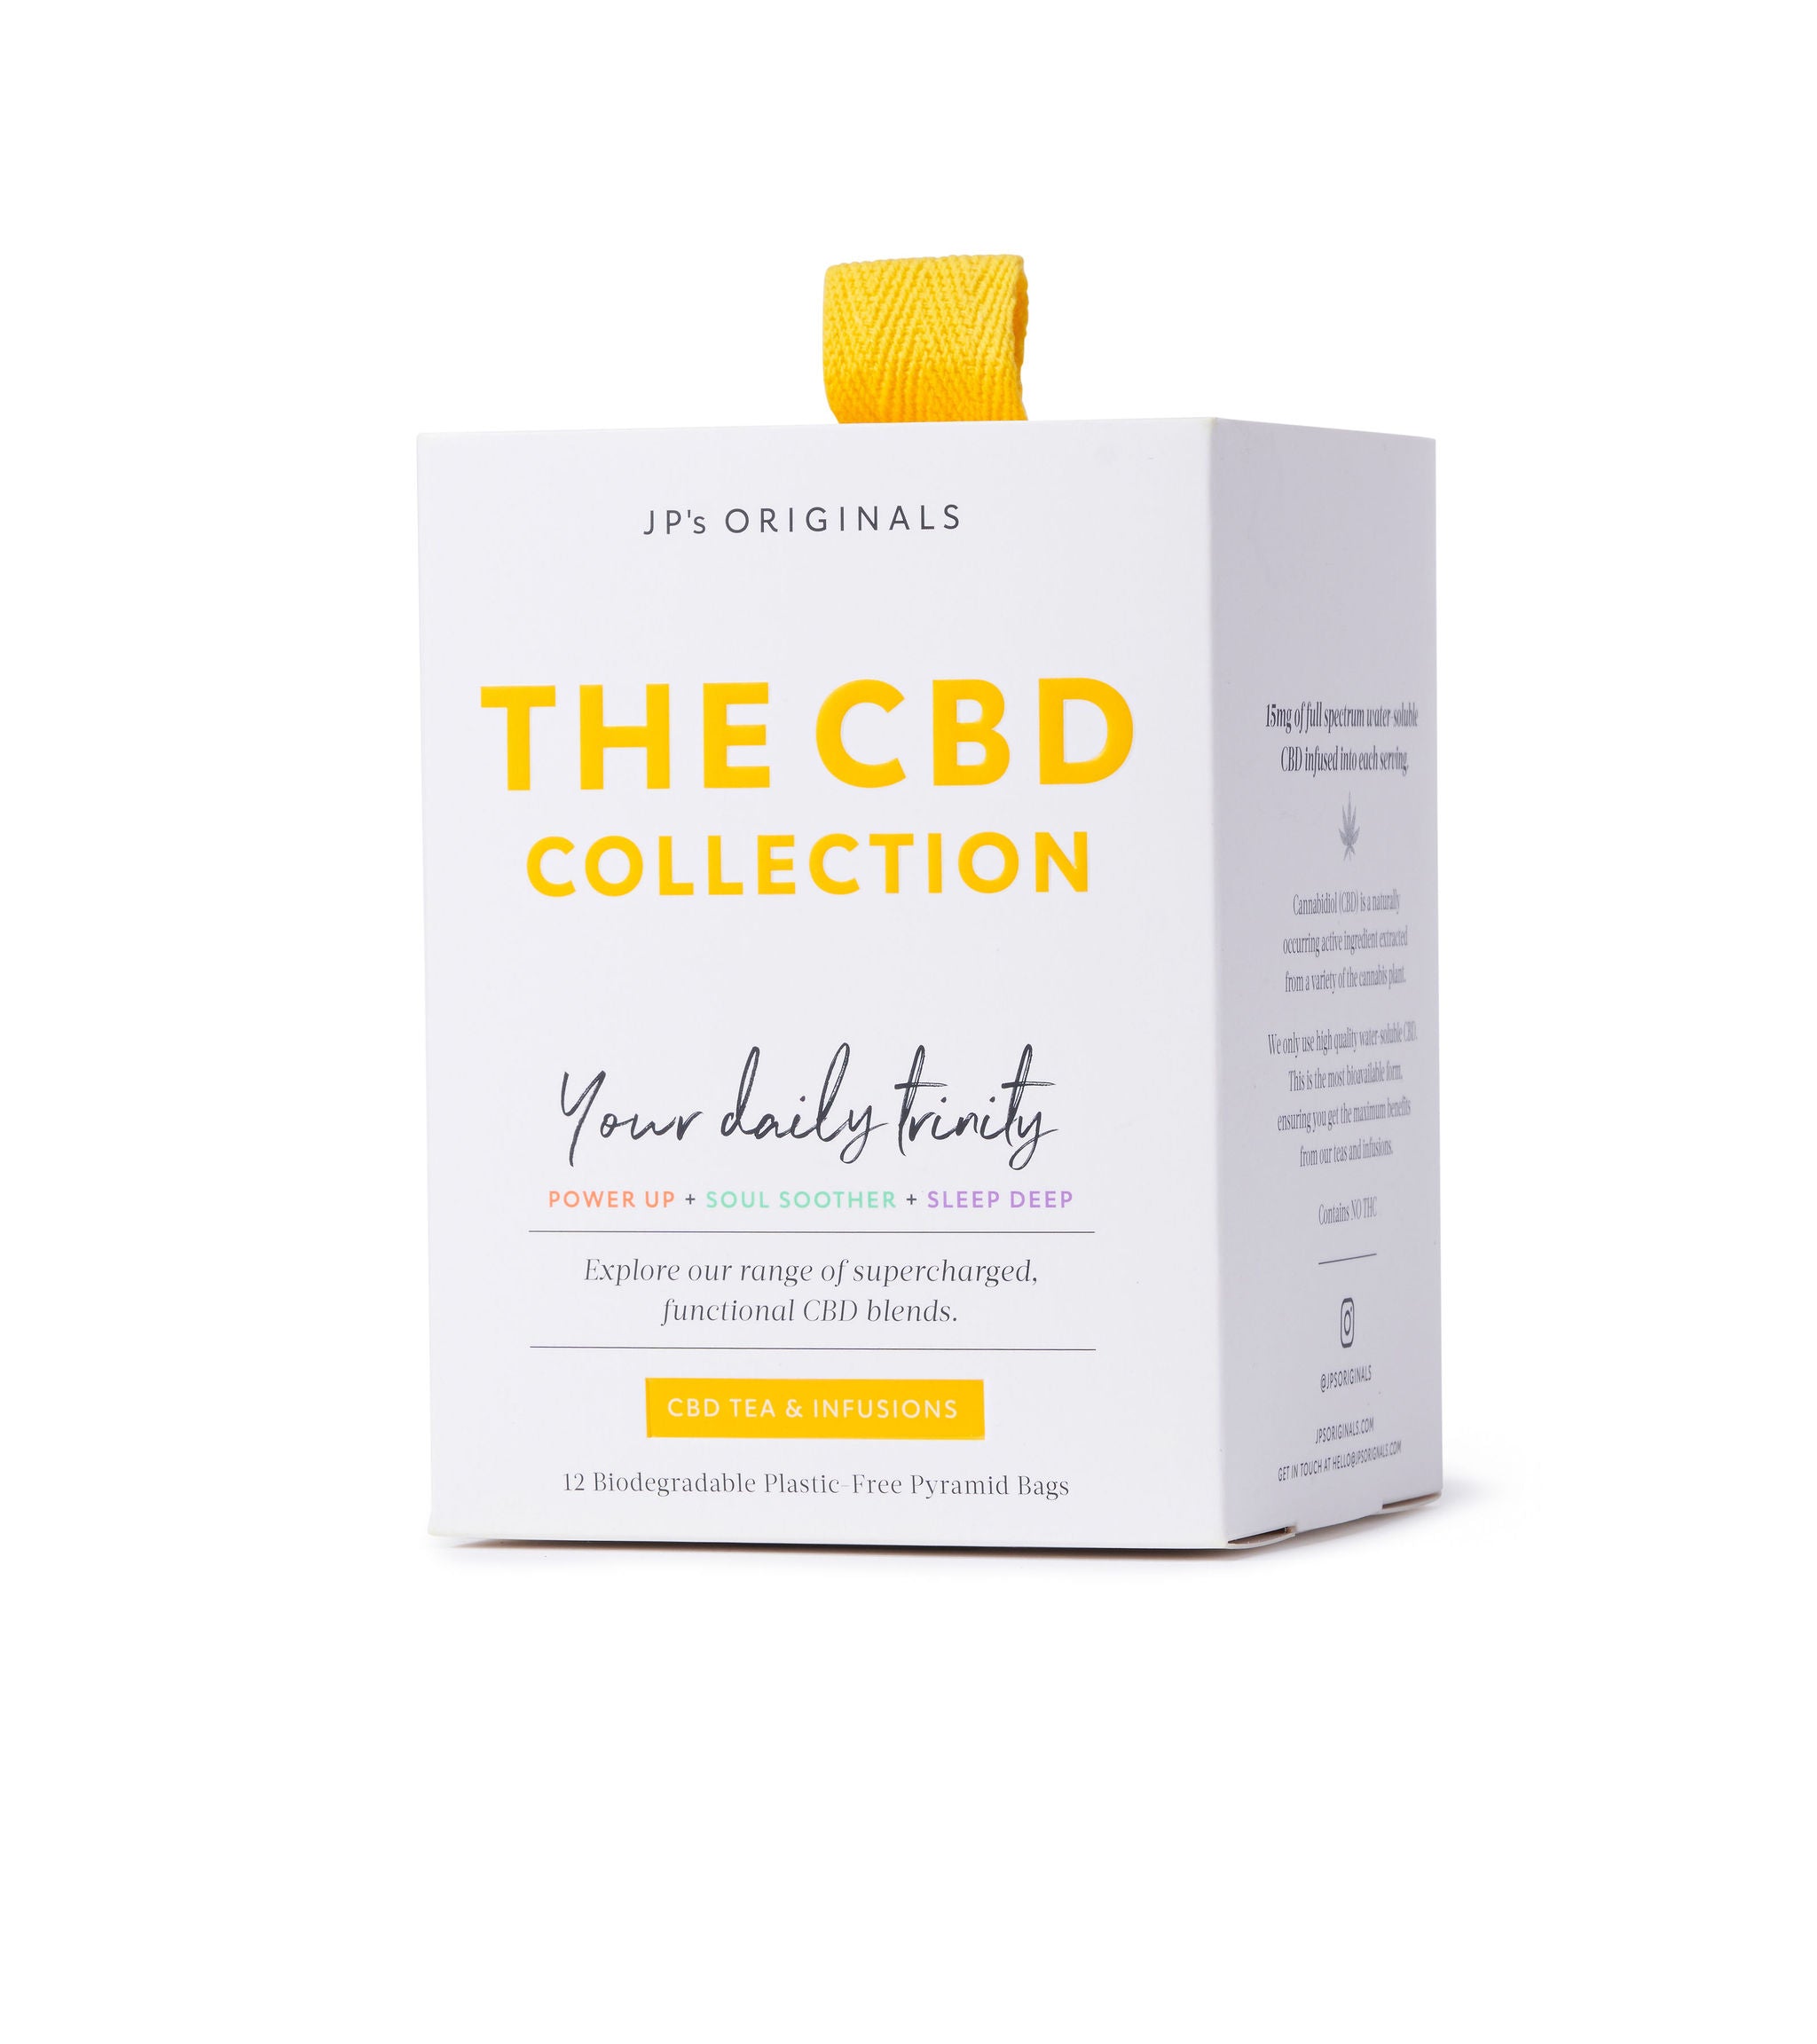 THE CBD COLLECTION